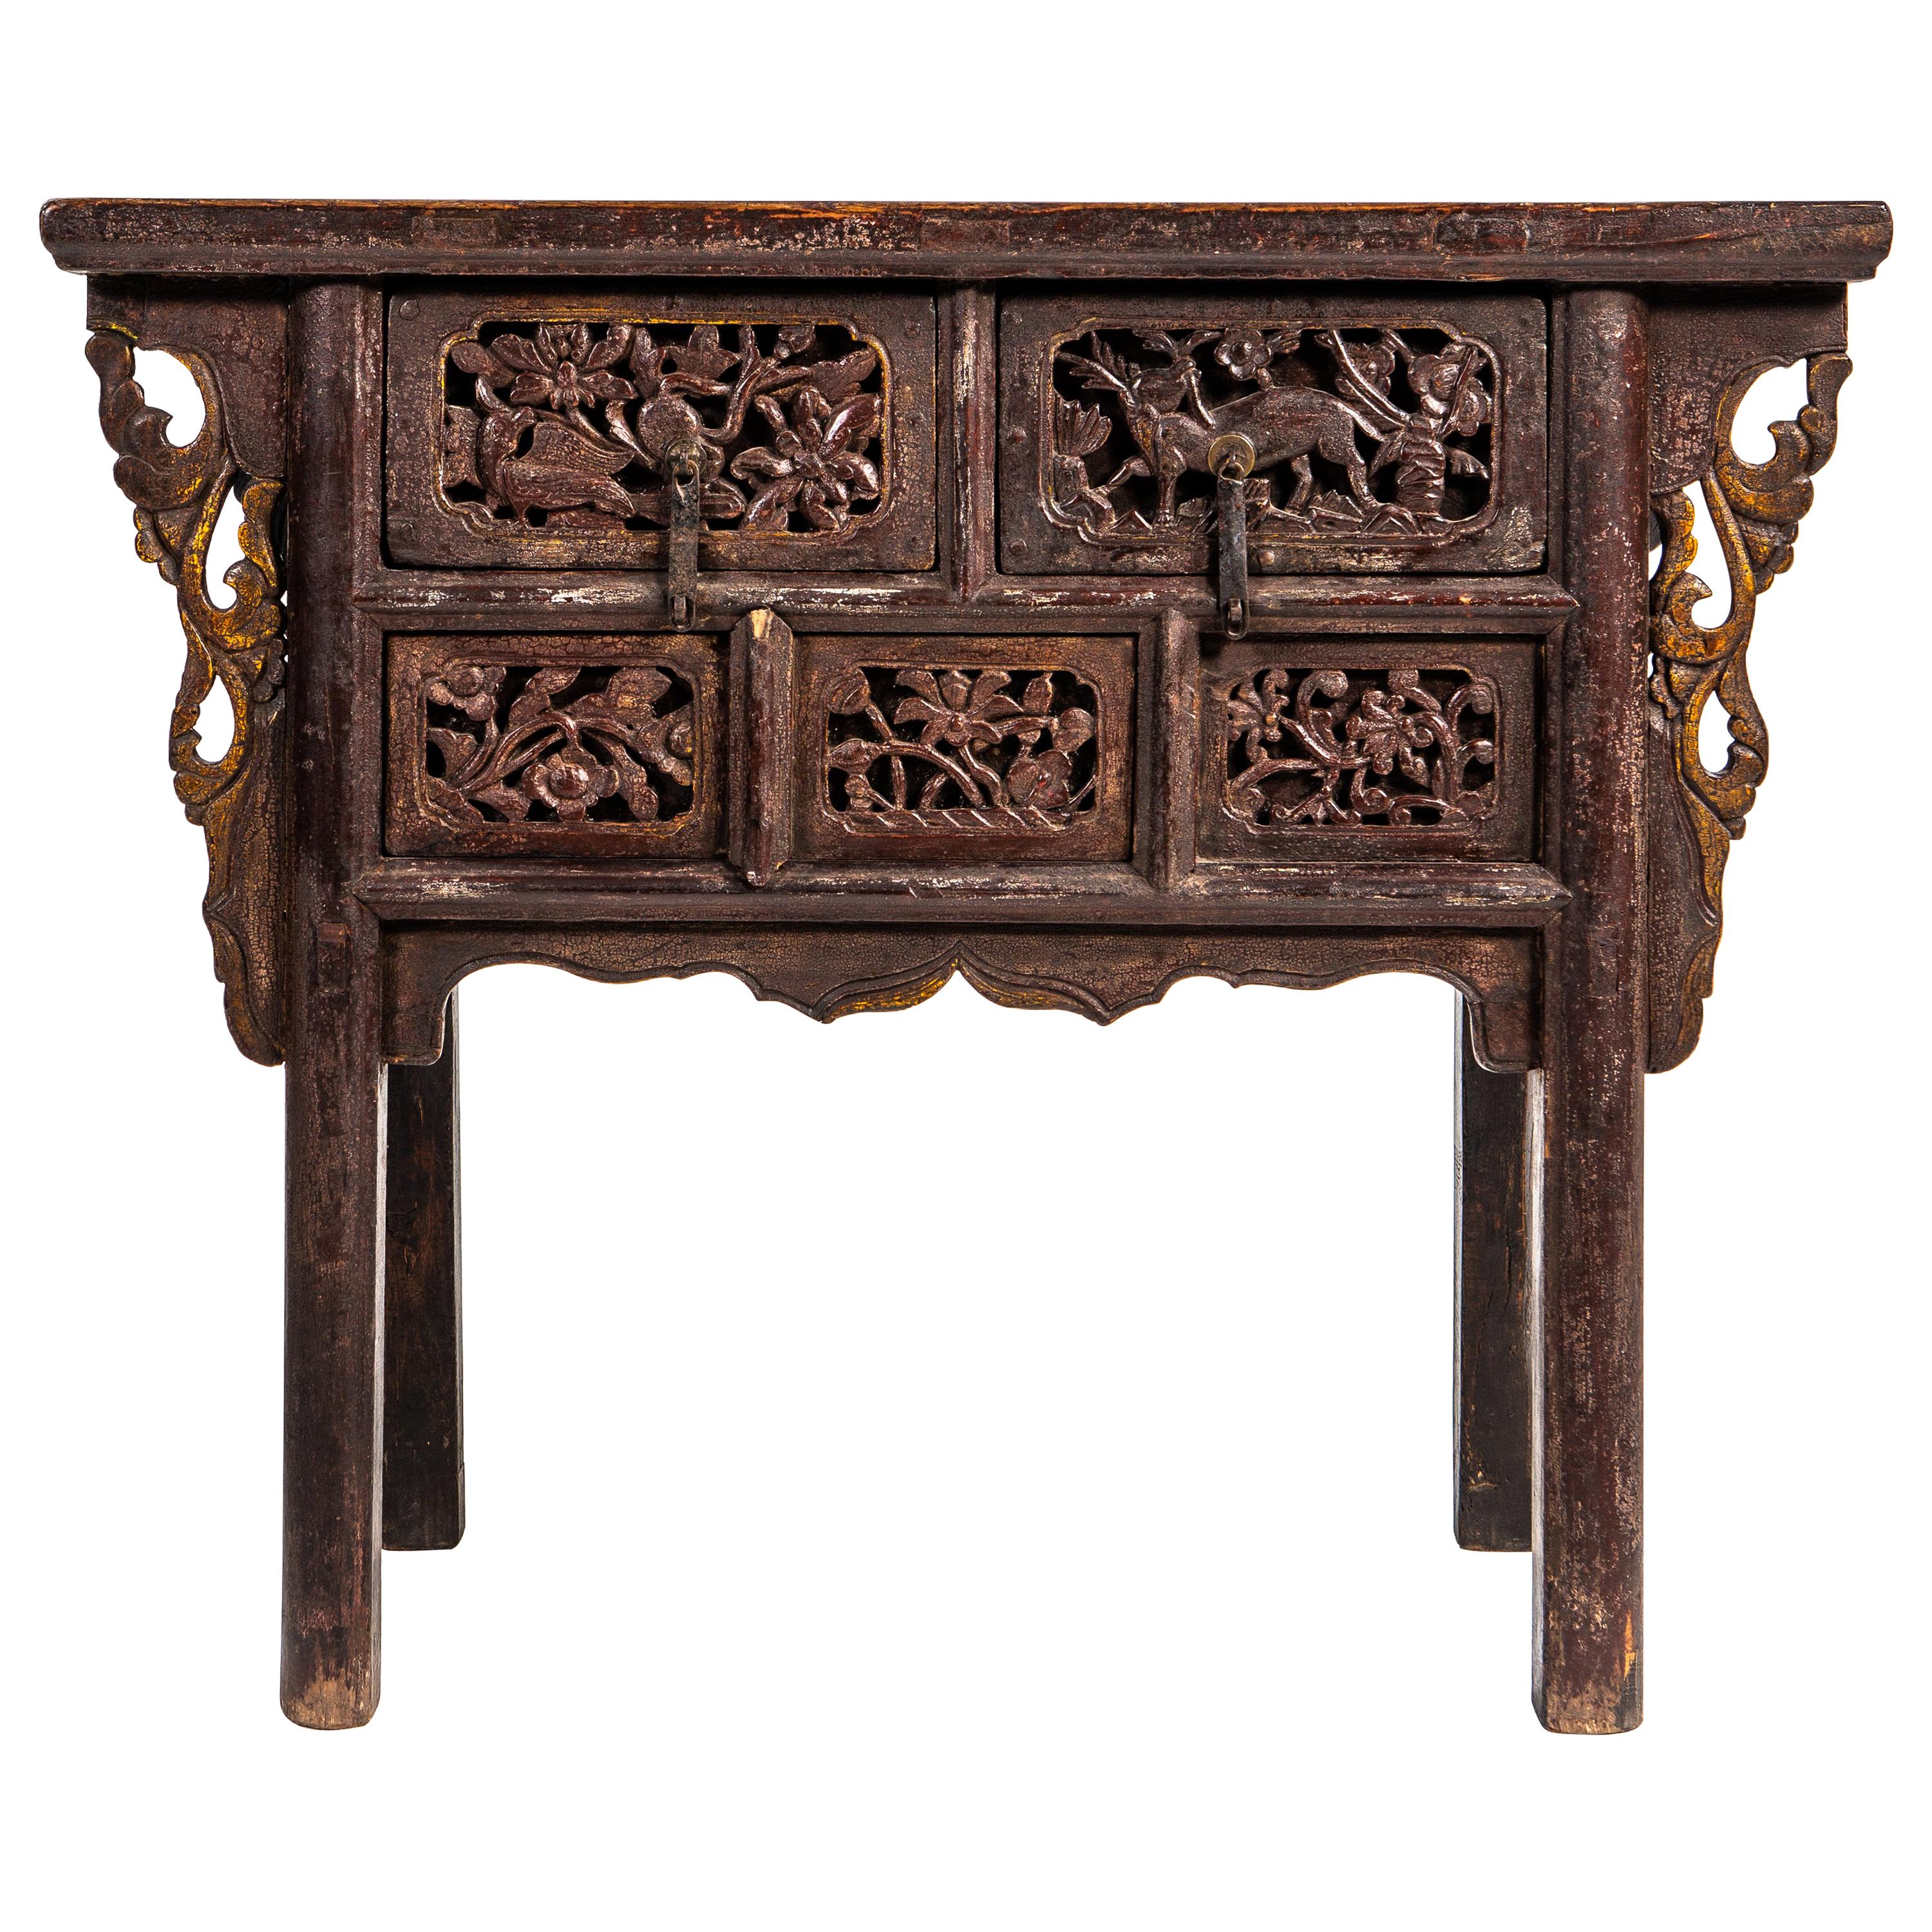 Late Qing Dynasty Side Chest with Two Drawers